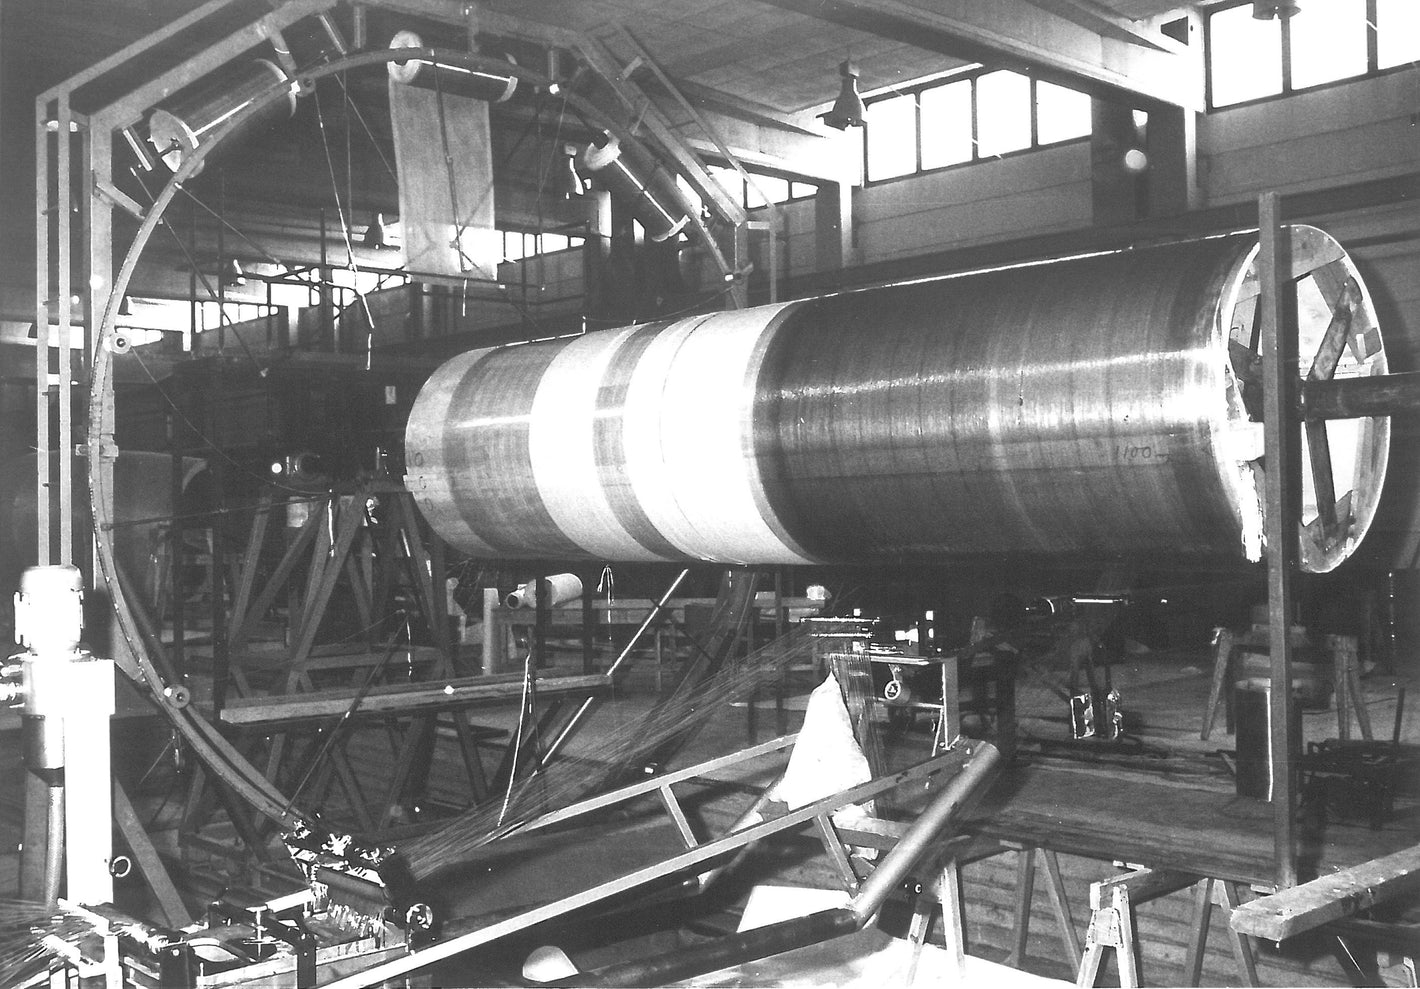 A black and white photo of composites weaving when the technology was quite new